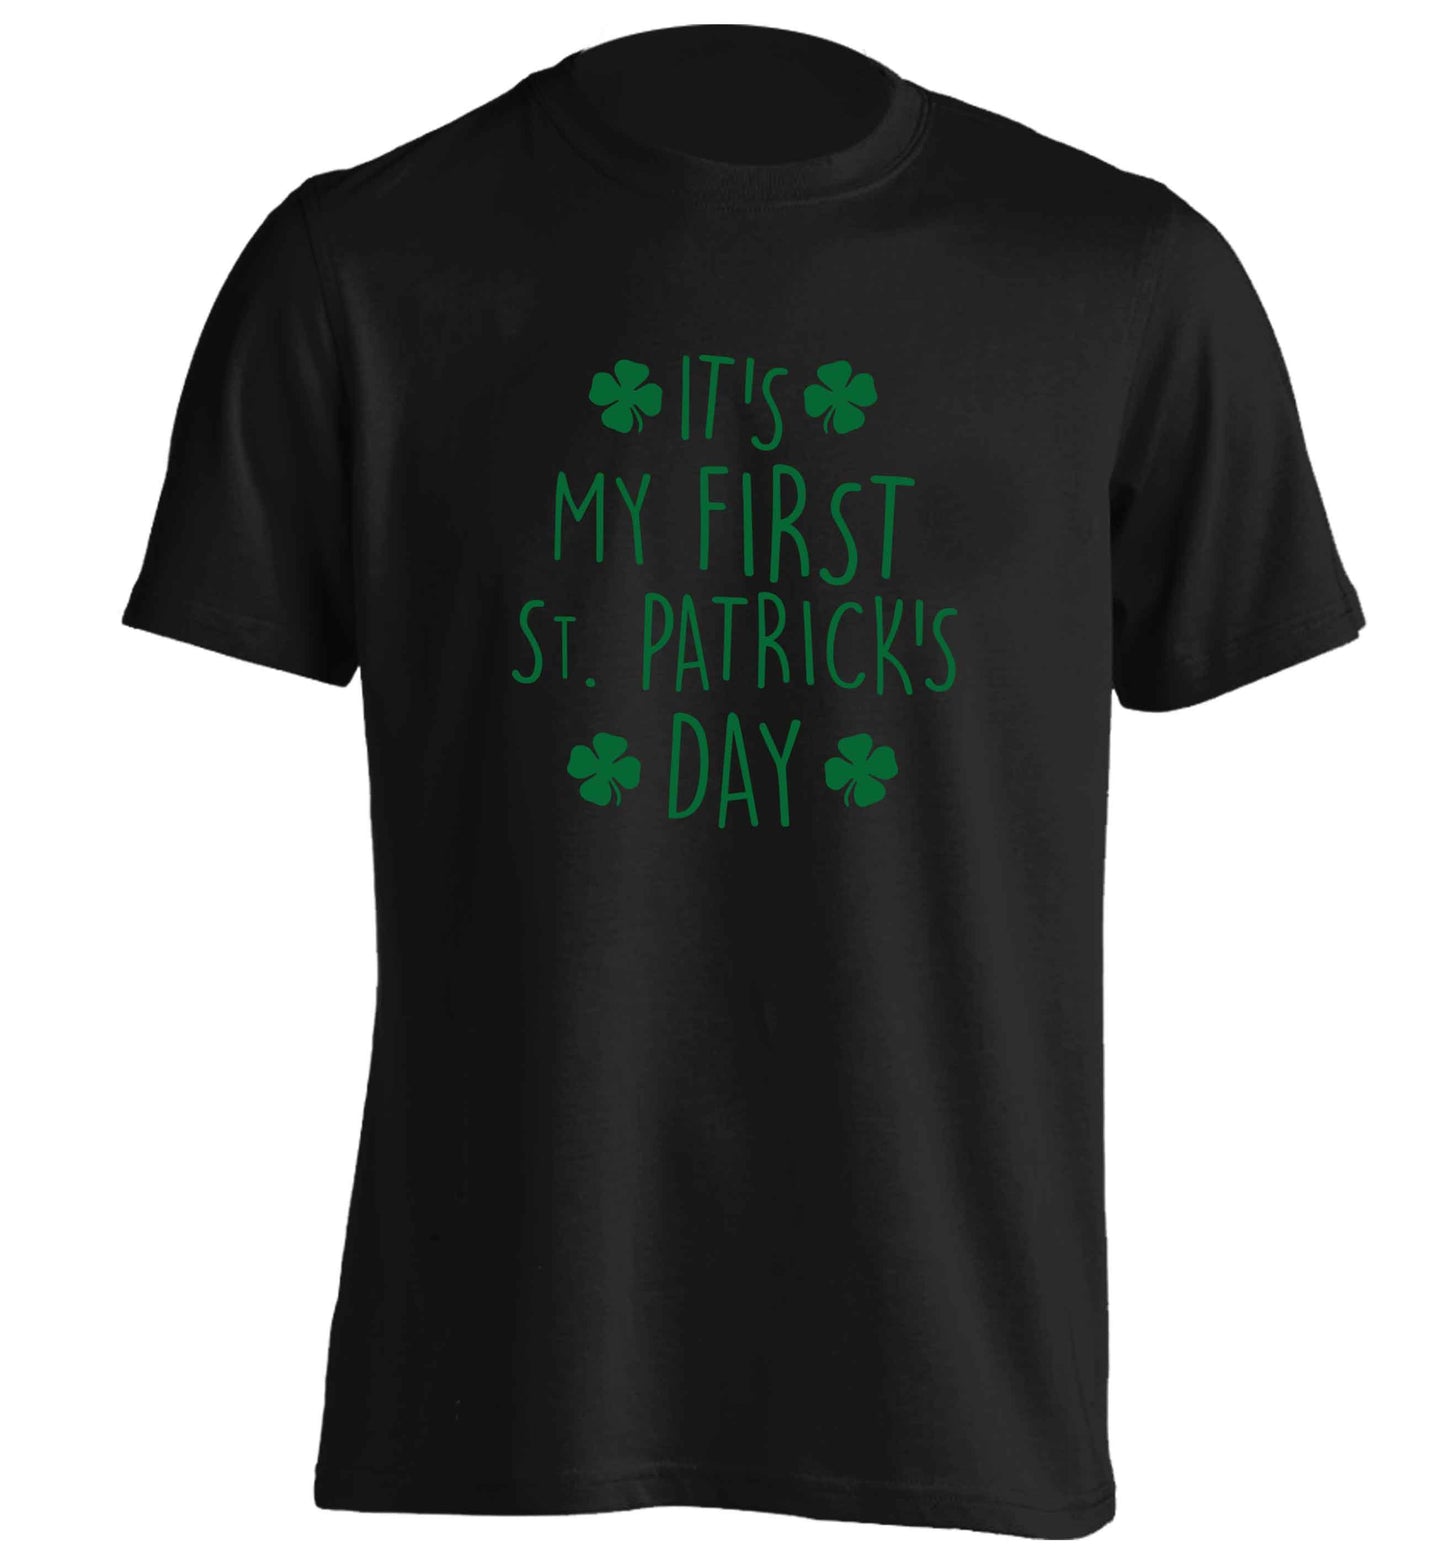 It's my first St.Patrick's day adults unisex black Tshirt 2XL